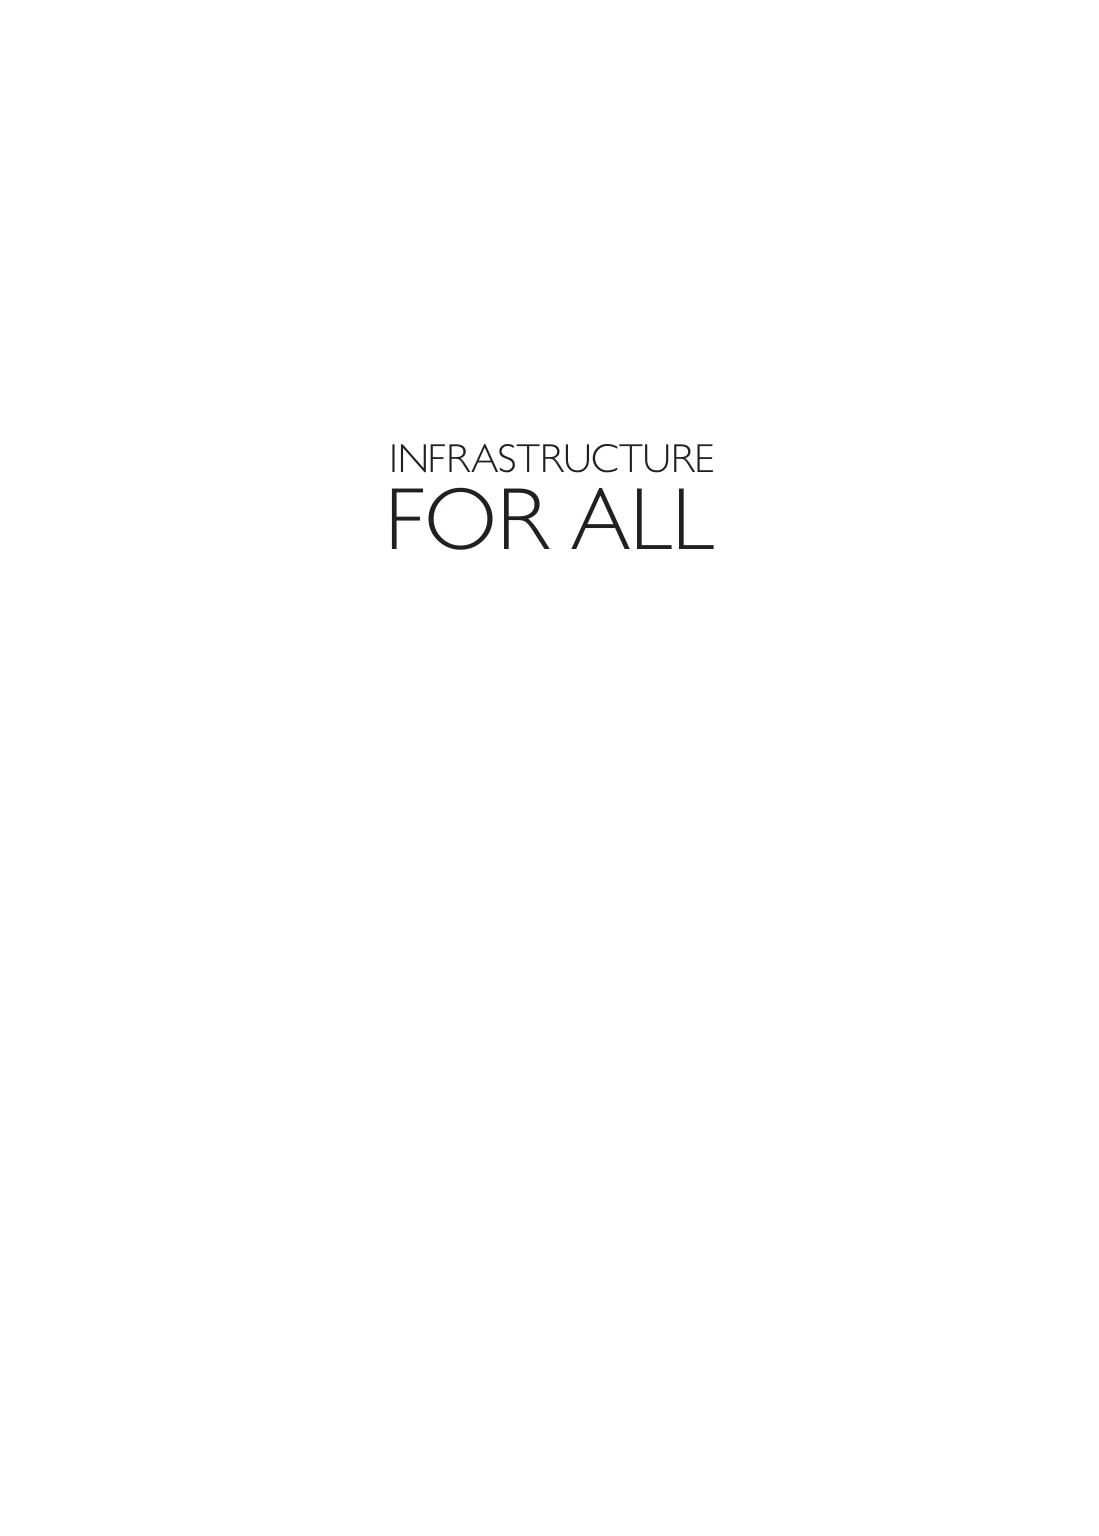 Infrastructure for All